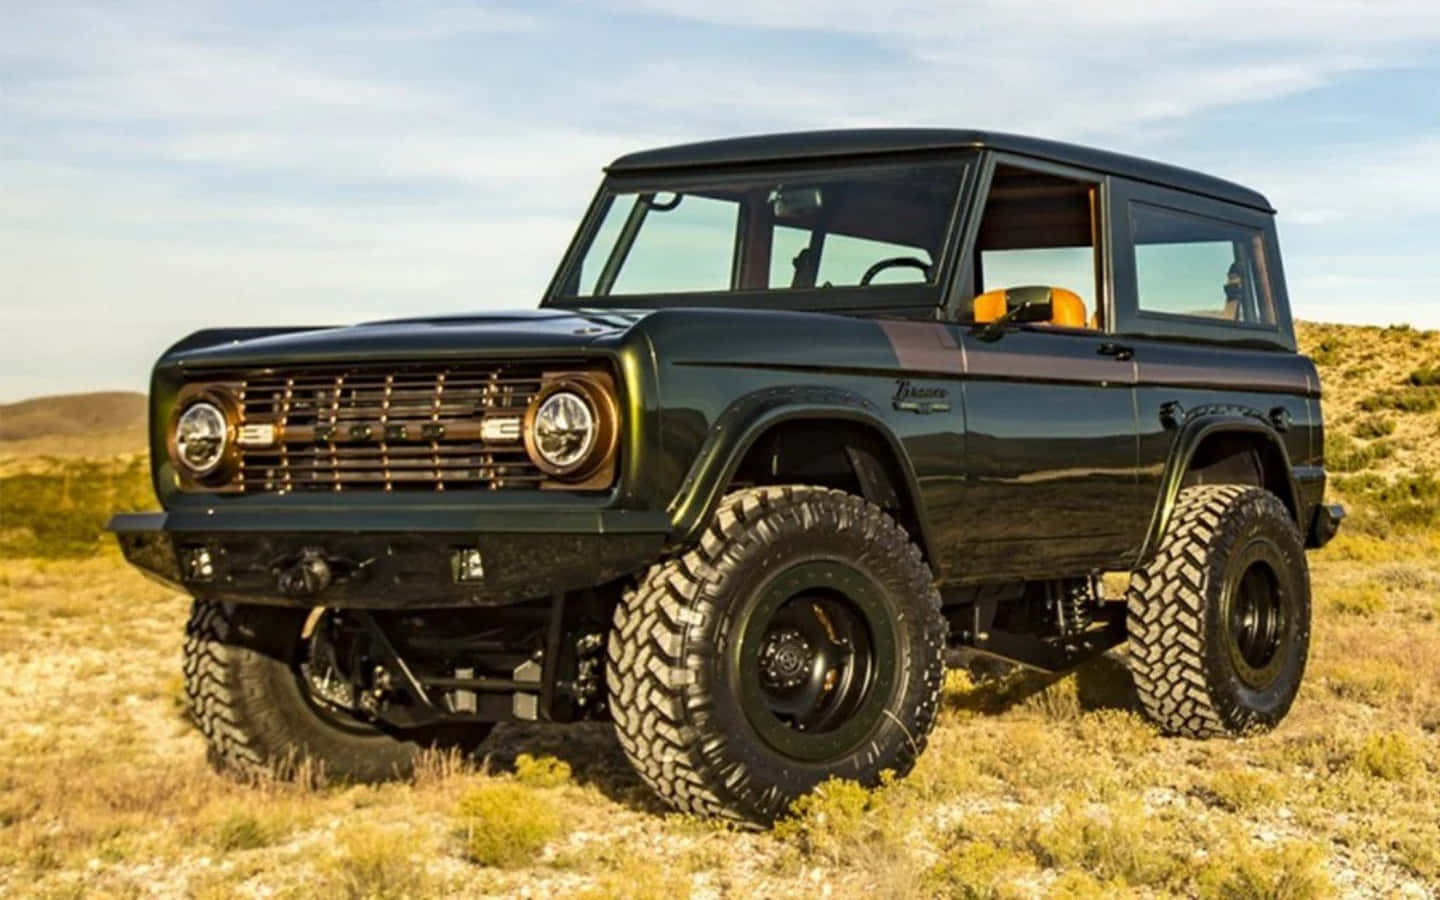 Ready for Adventure in the Ford Bronco